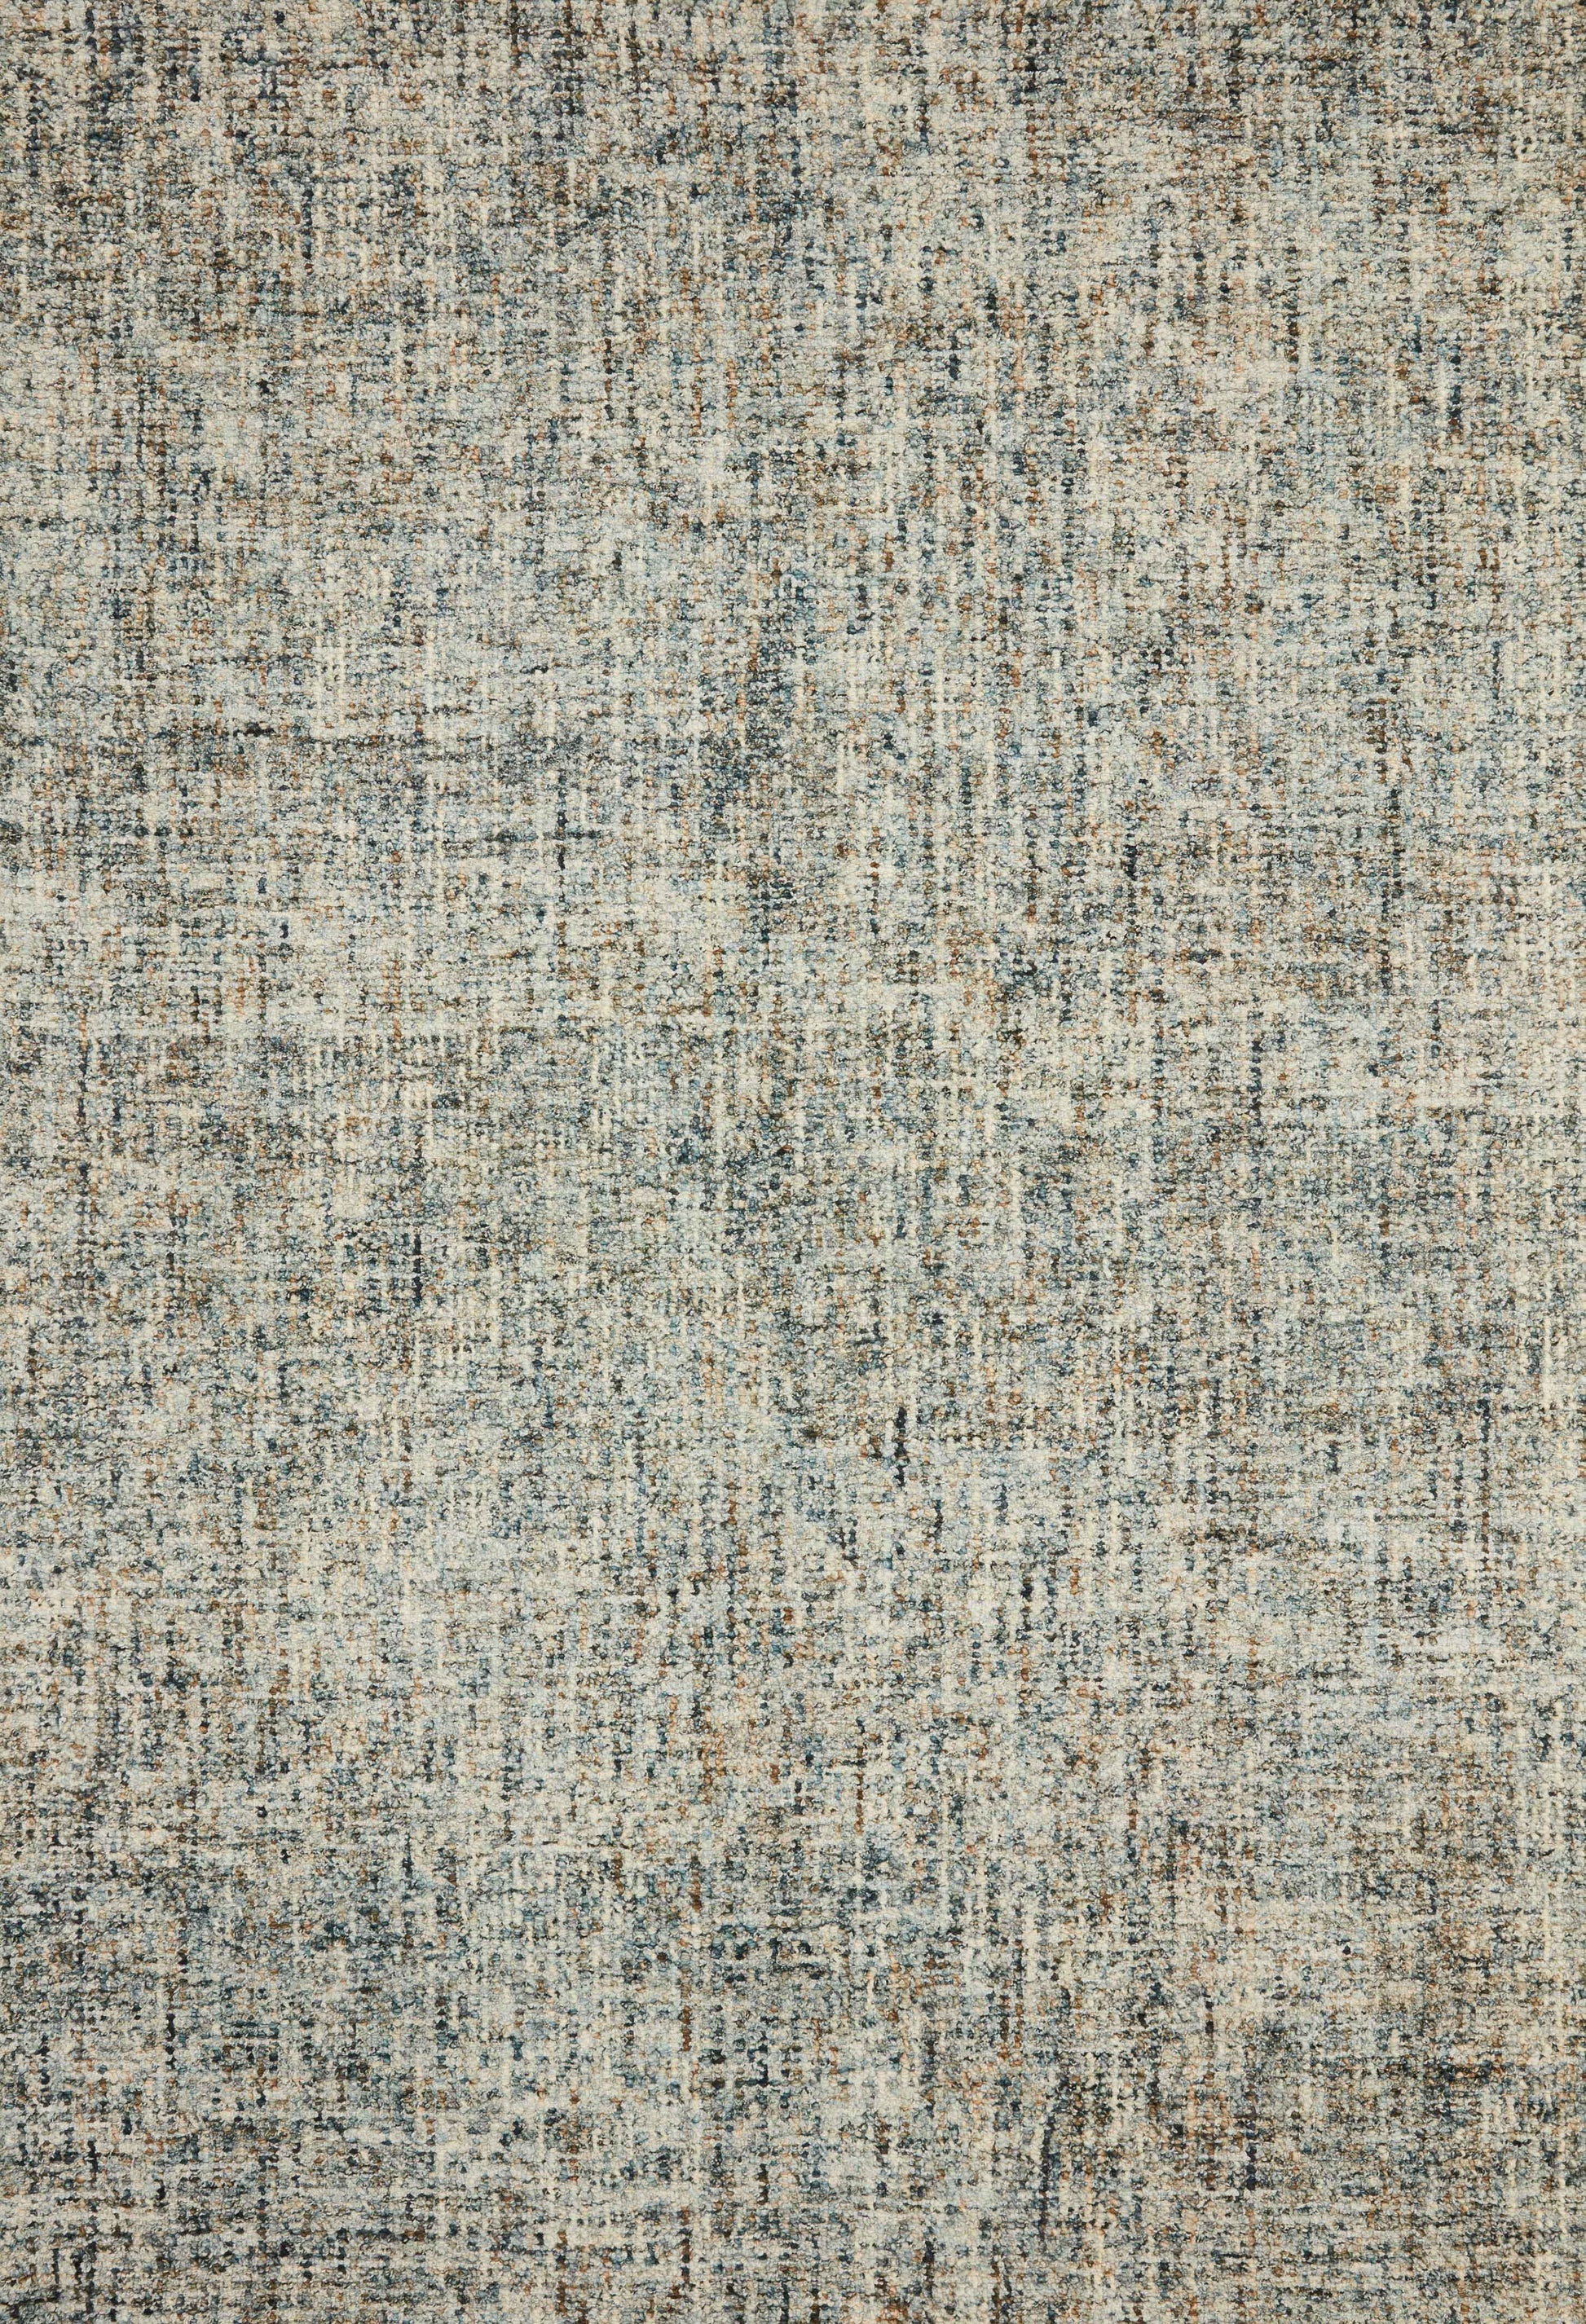 A picture of Loloi's Harlow rug, in style HLO-01, color Ocean / Sand